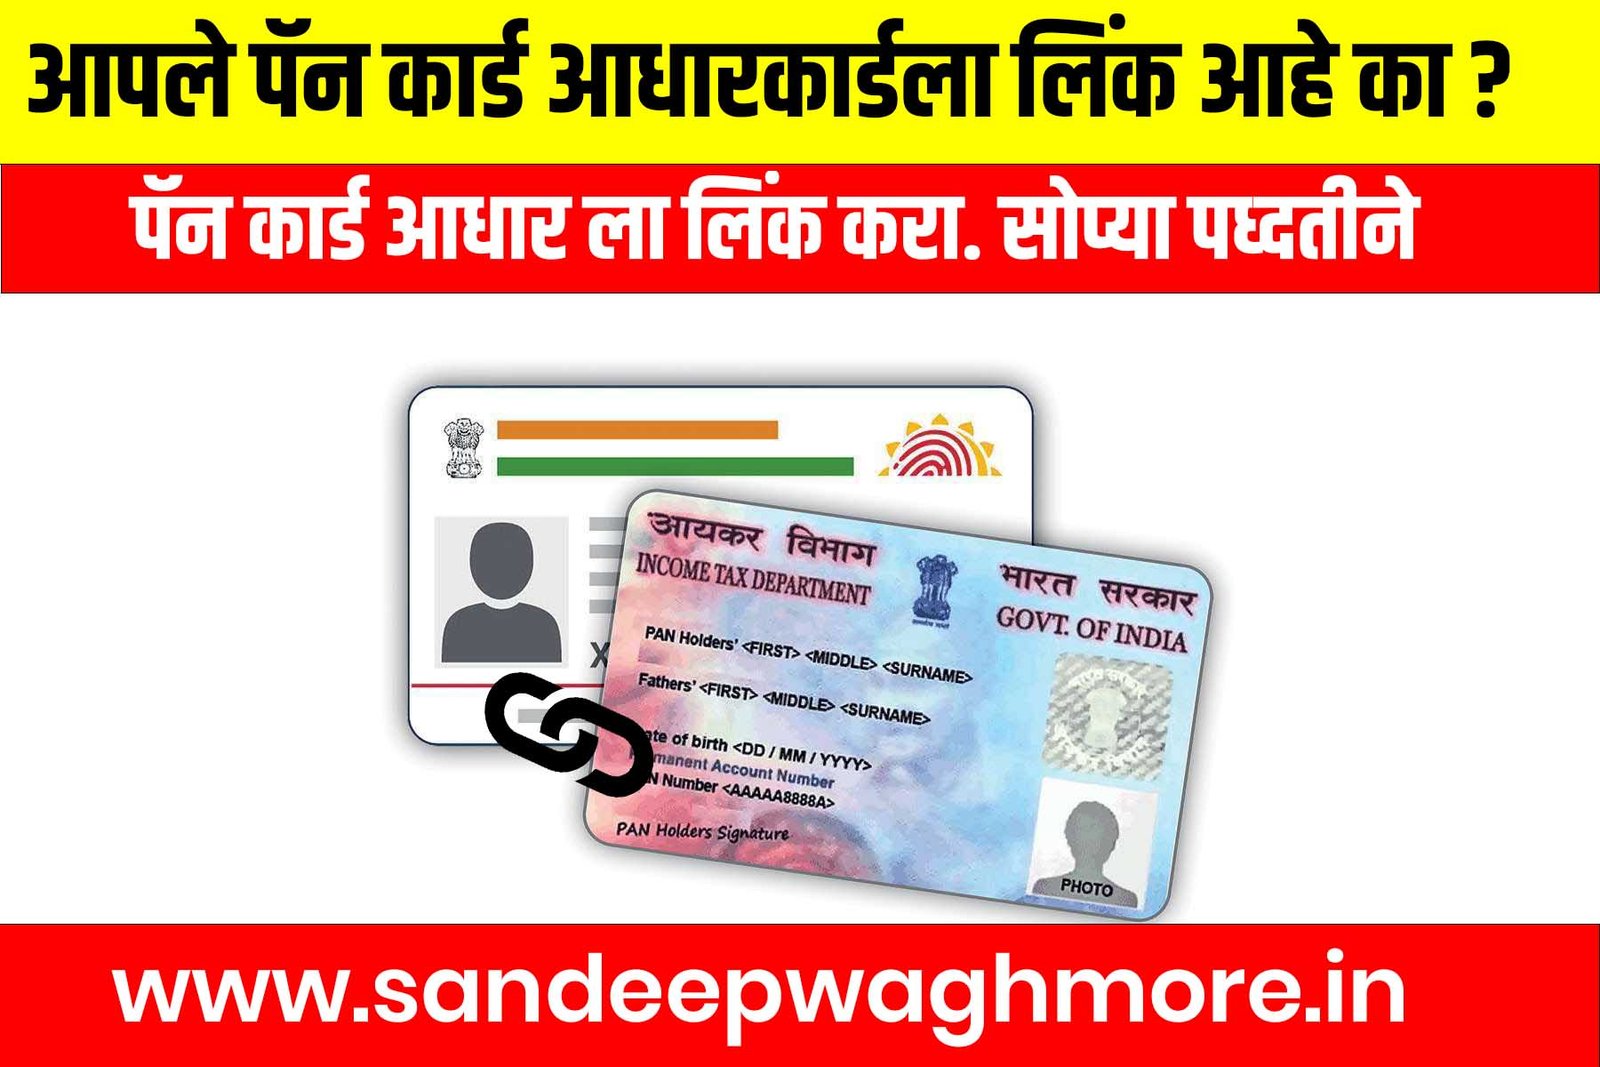 How to link pan card with aadhar card